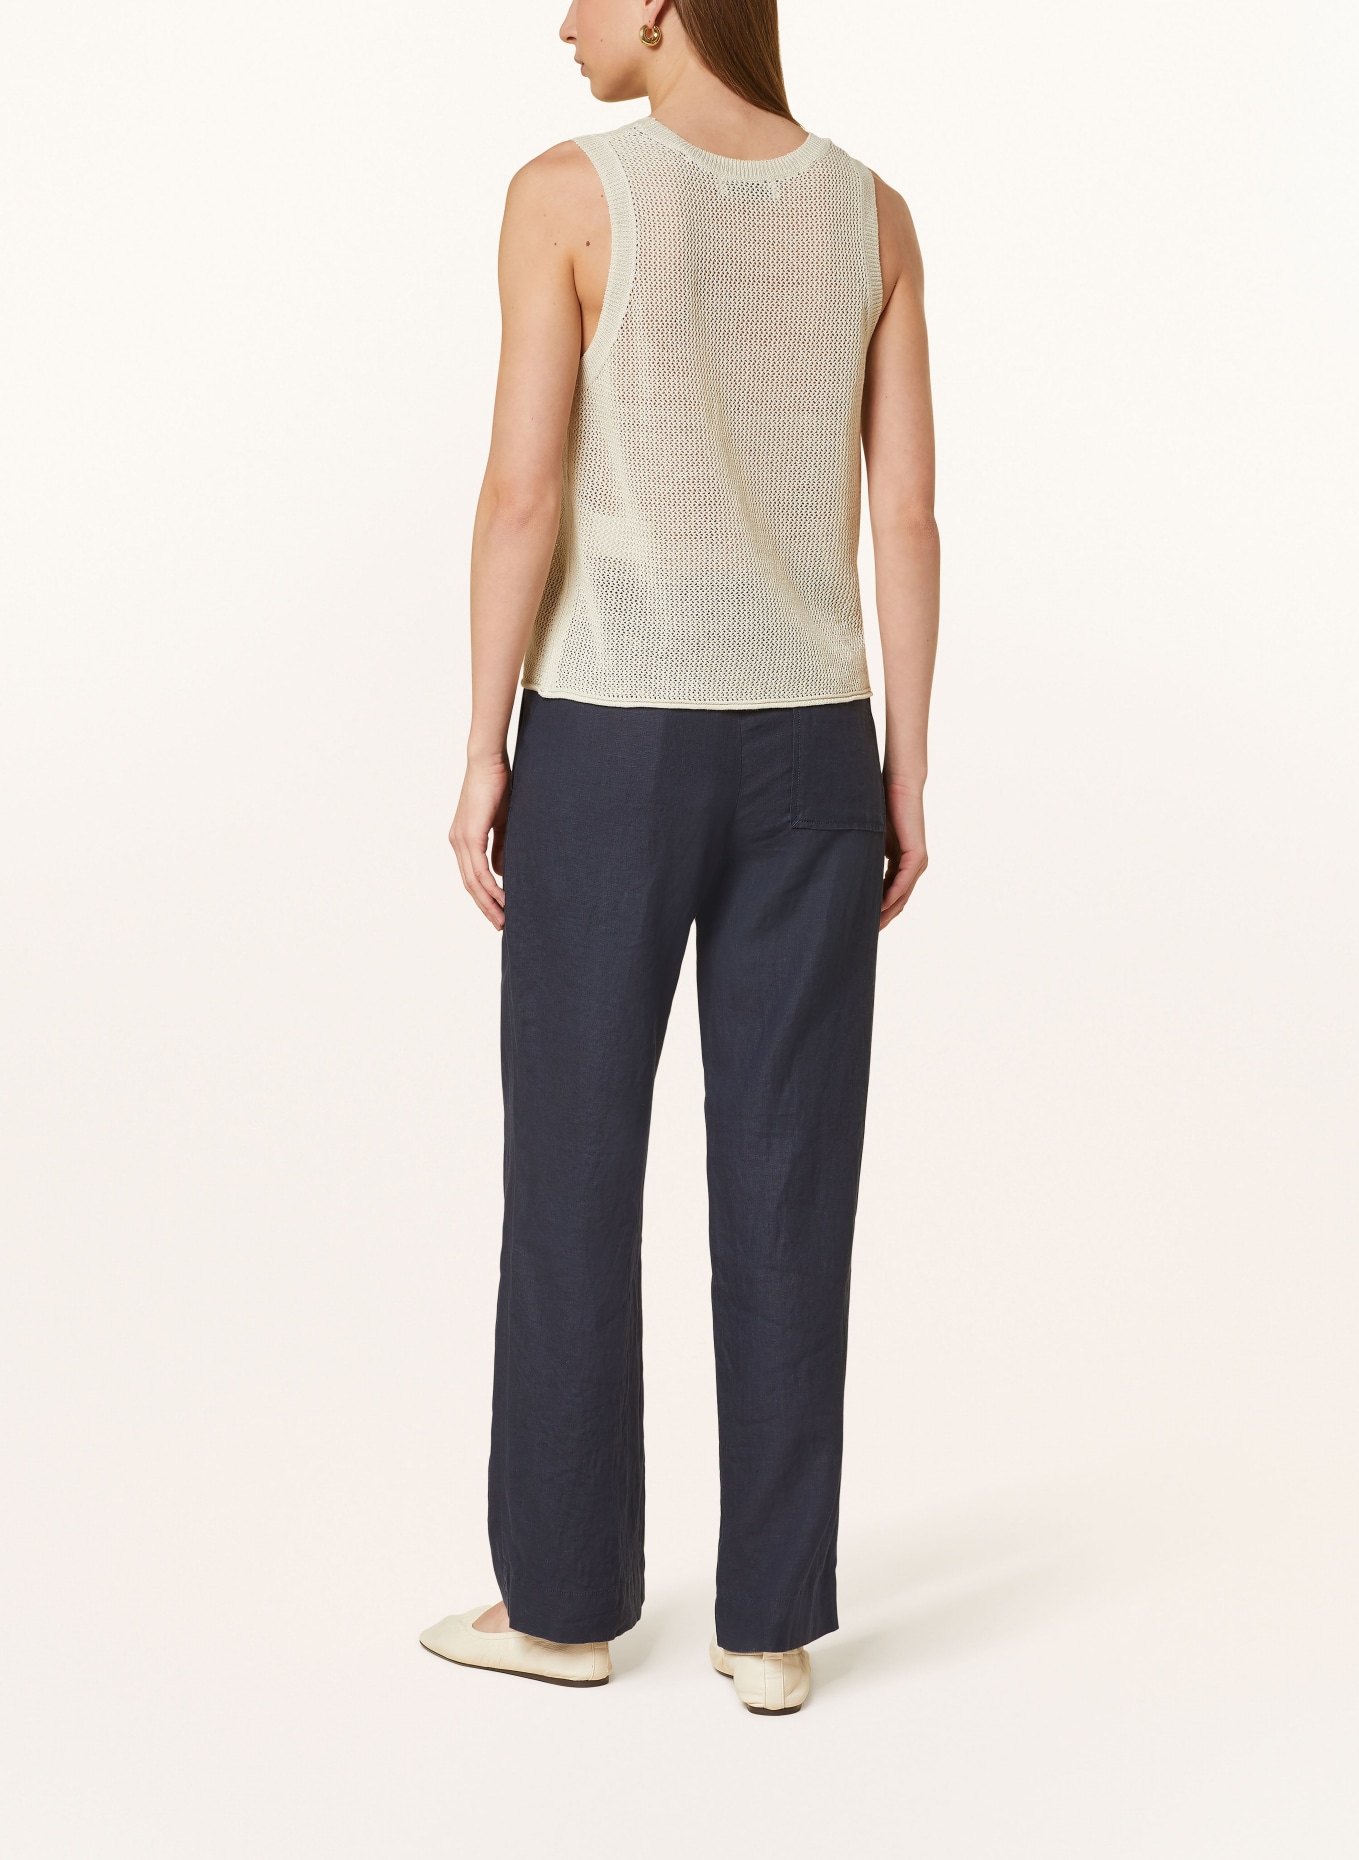 Marc O'Polo Knit top, Color: TAUPE (Image 3)